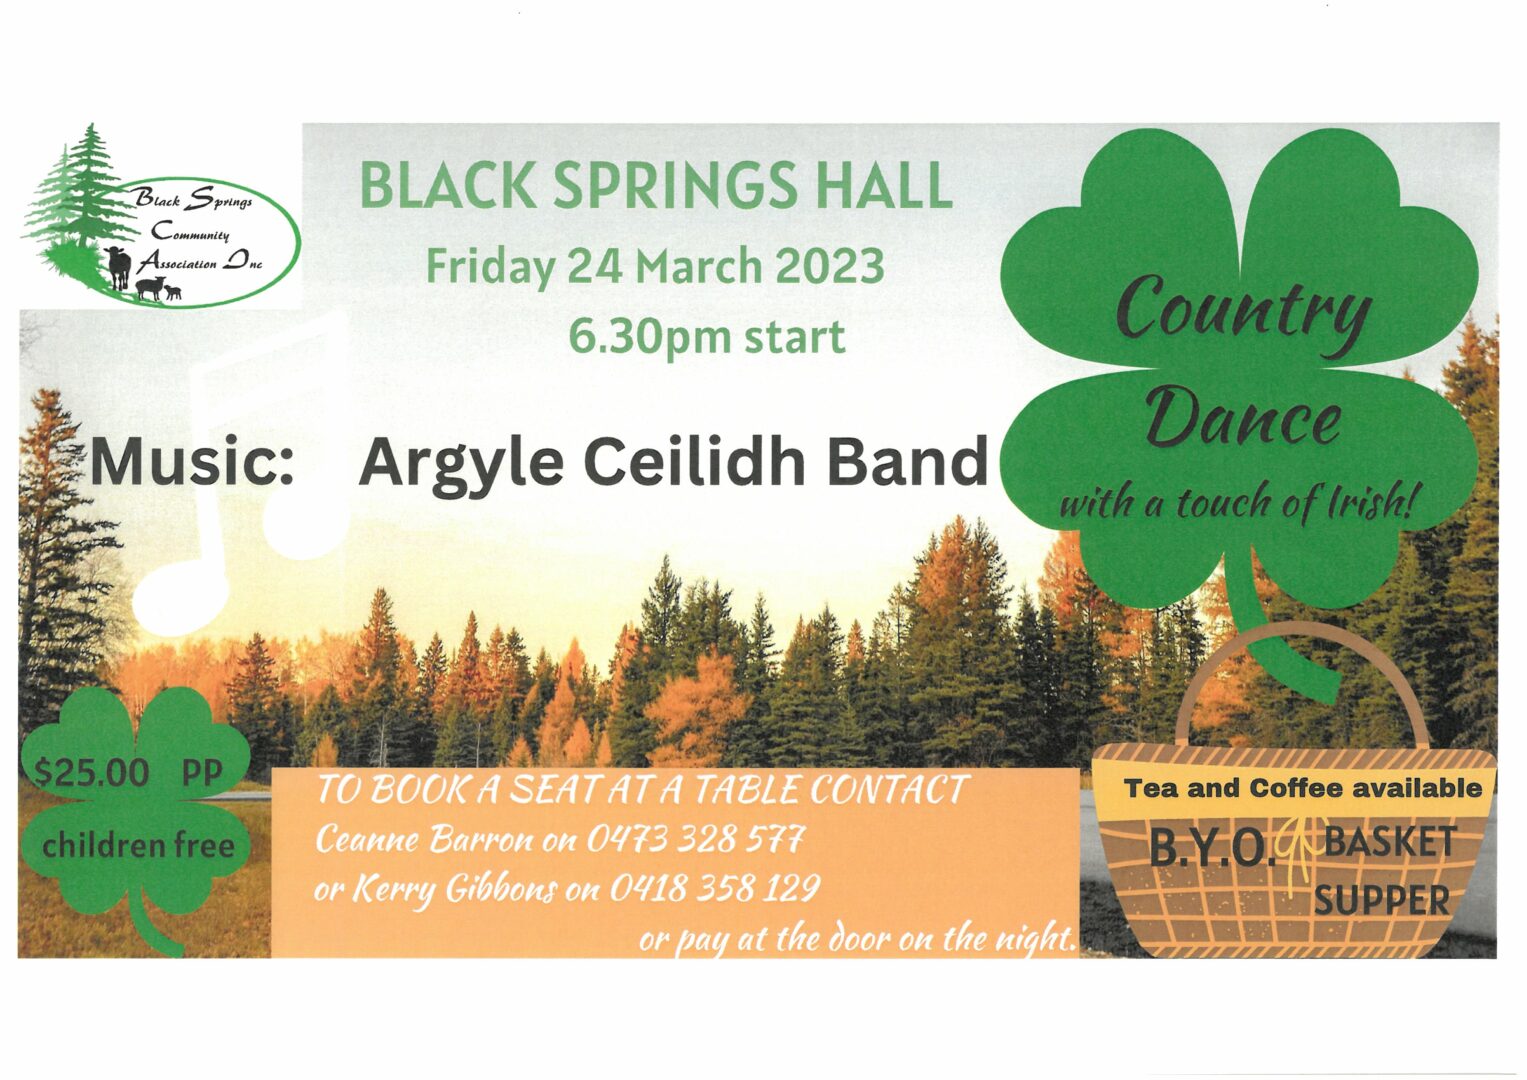 Country Dance with a touch of Irish